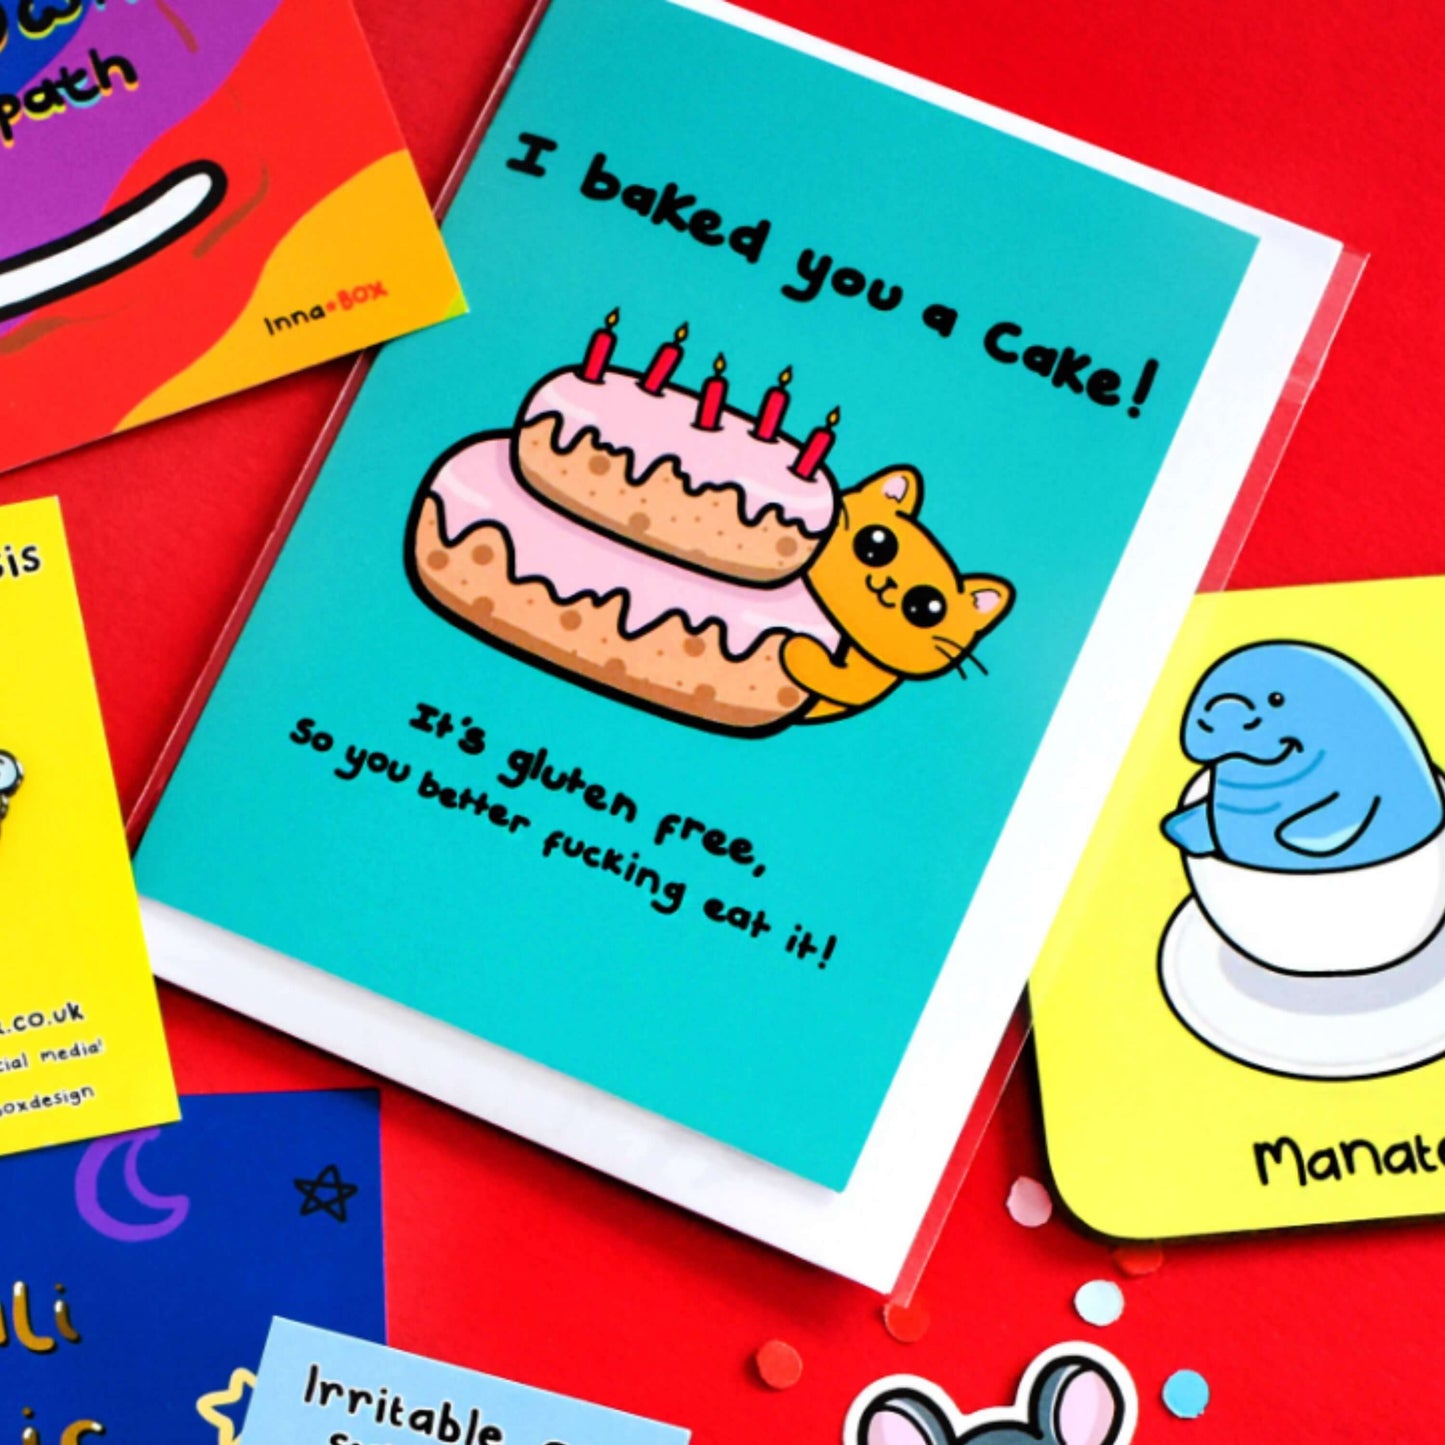 A turquoise blue card that has a drawing of a yellow cat poking around a pink layered cake with candles in the top. Text on the card says I baked you a cake! It's gluten free, so you better fucking eat it! The a6 cat themed birthday card is on a red background with other innabox products.